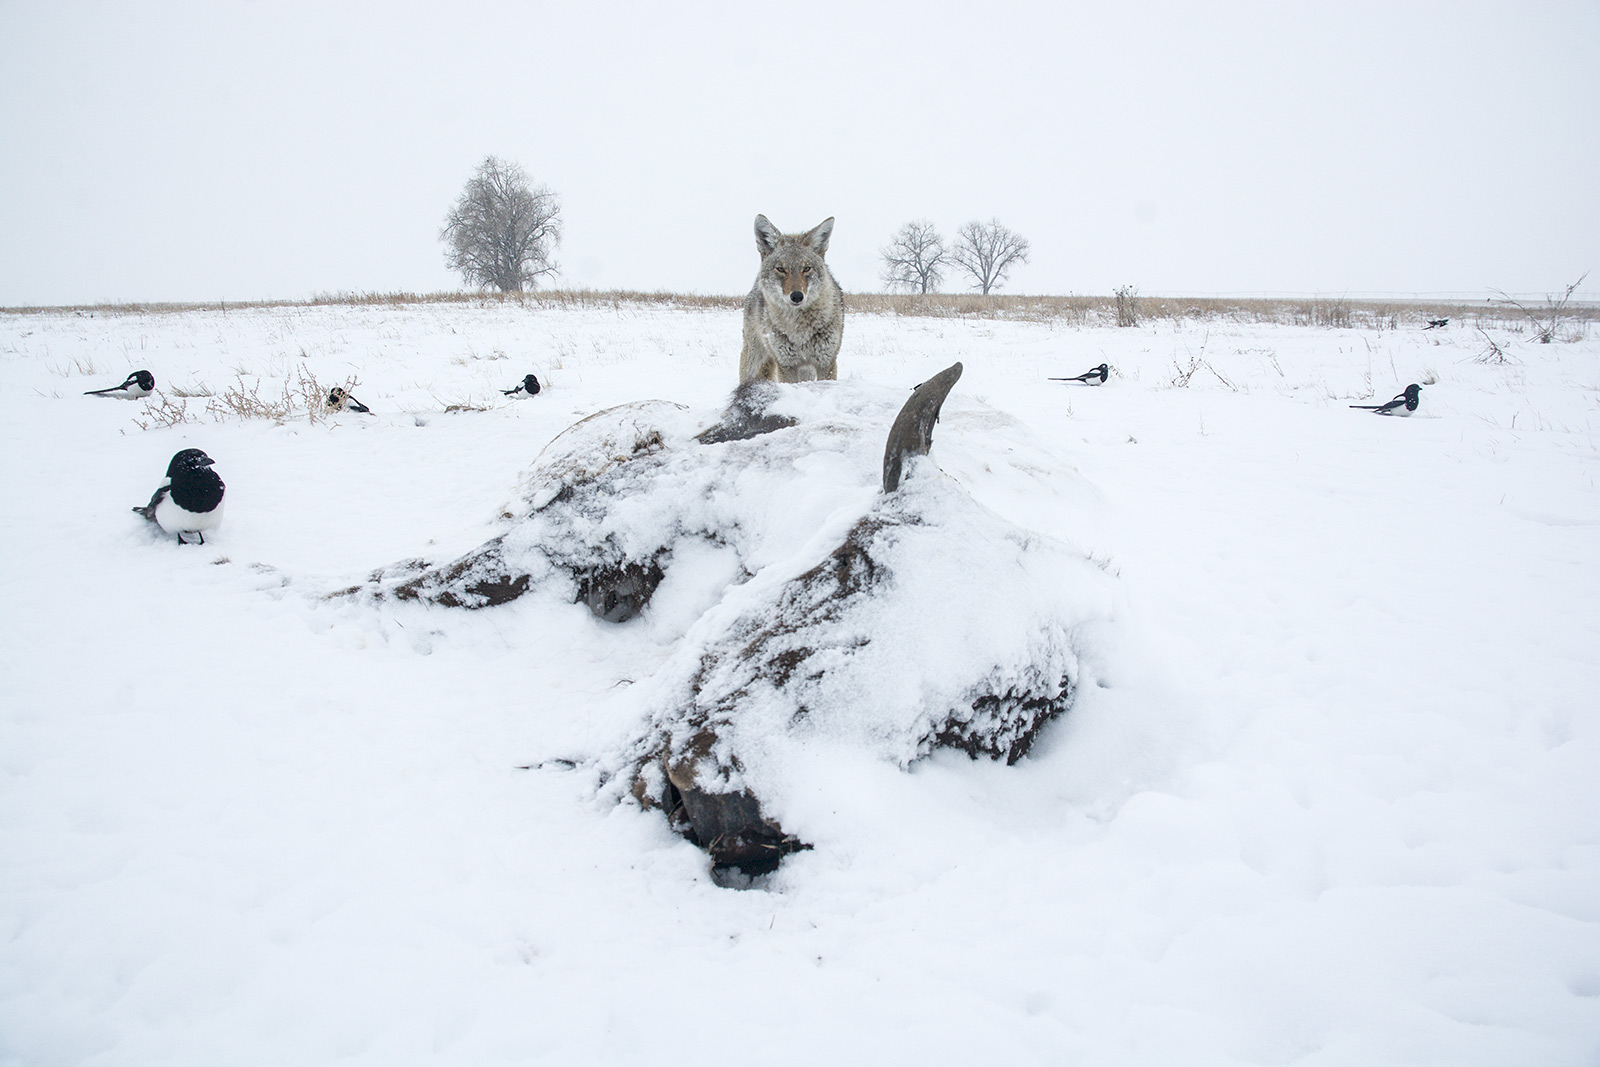 A coyote circled by magpies scavenges a bison carcass in winter. The carcass was visited by coyotes, magpies, bald eagles, starlings...